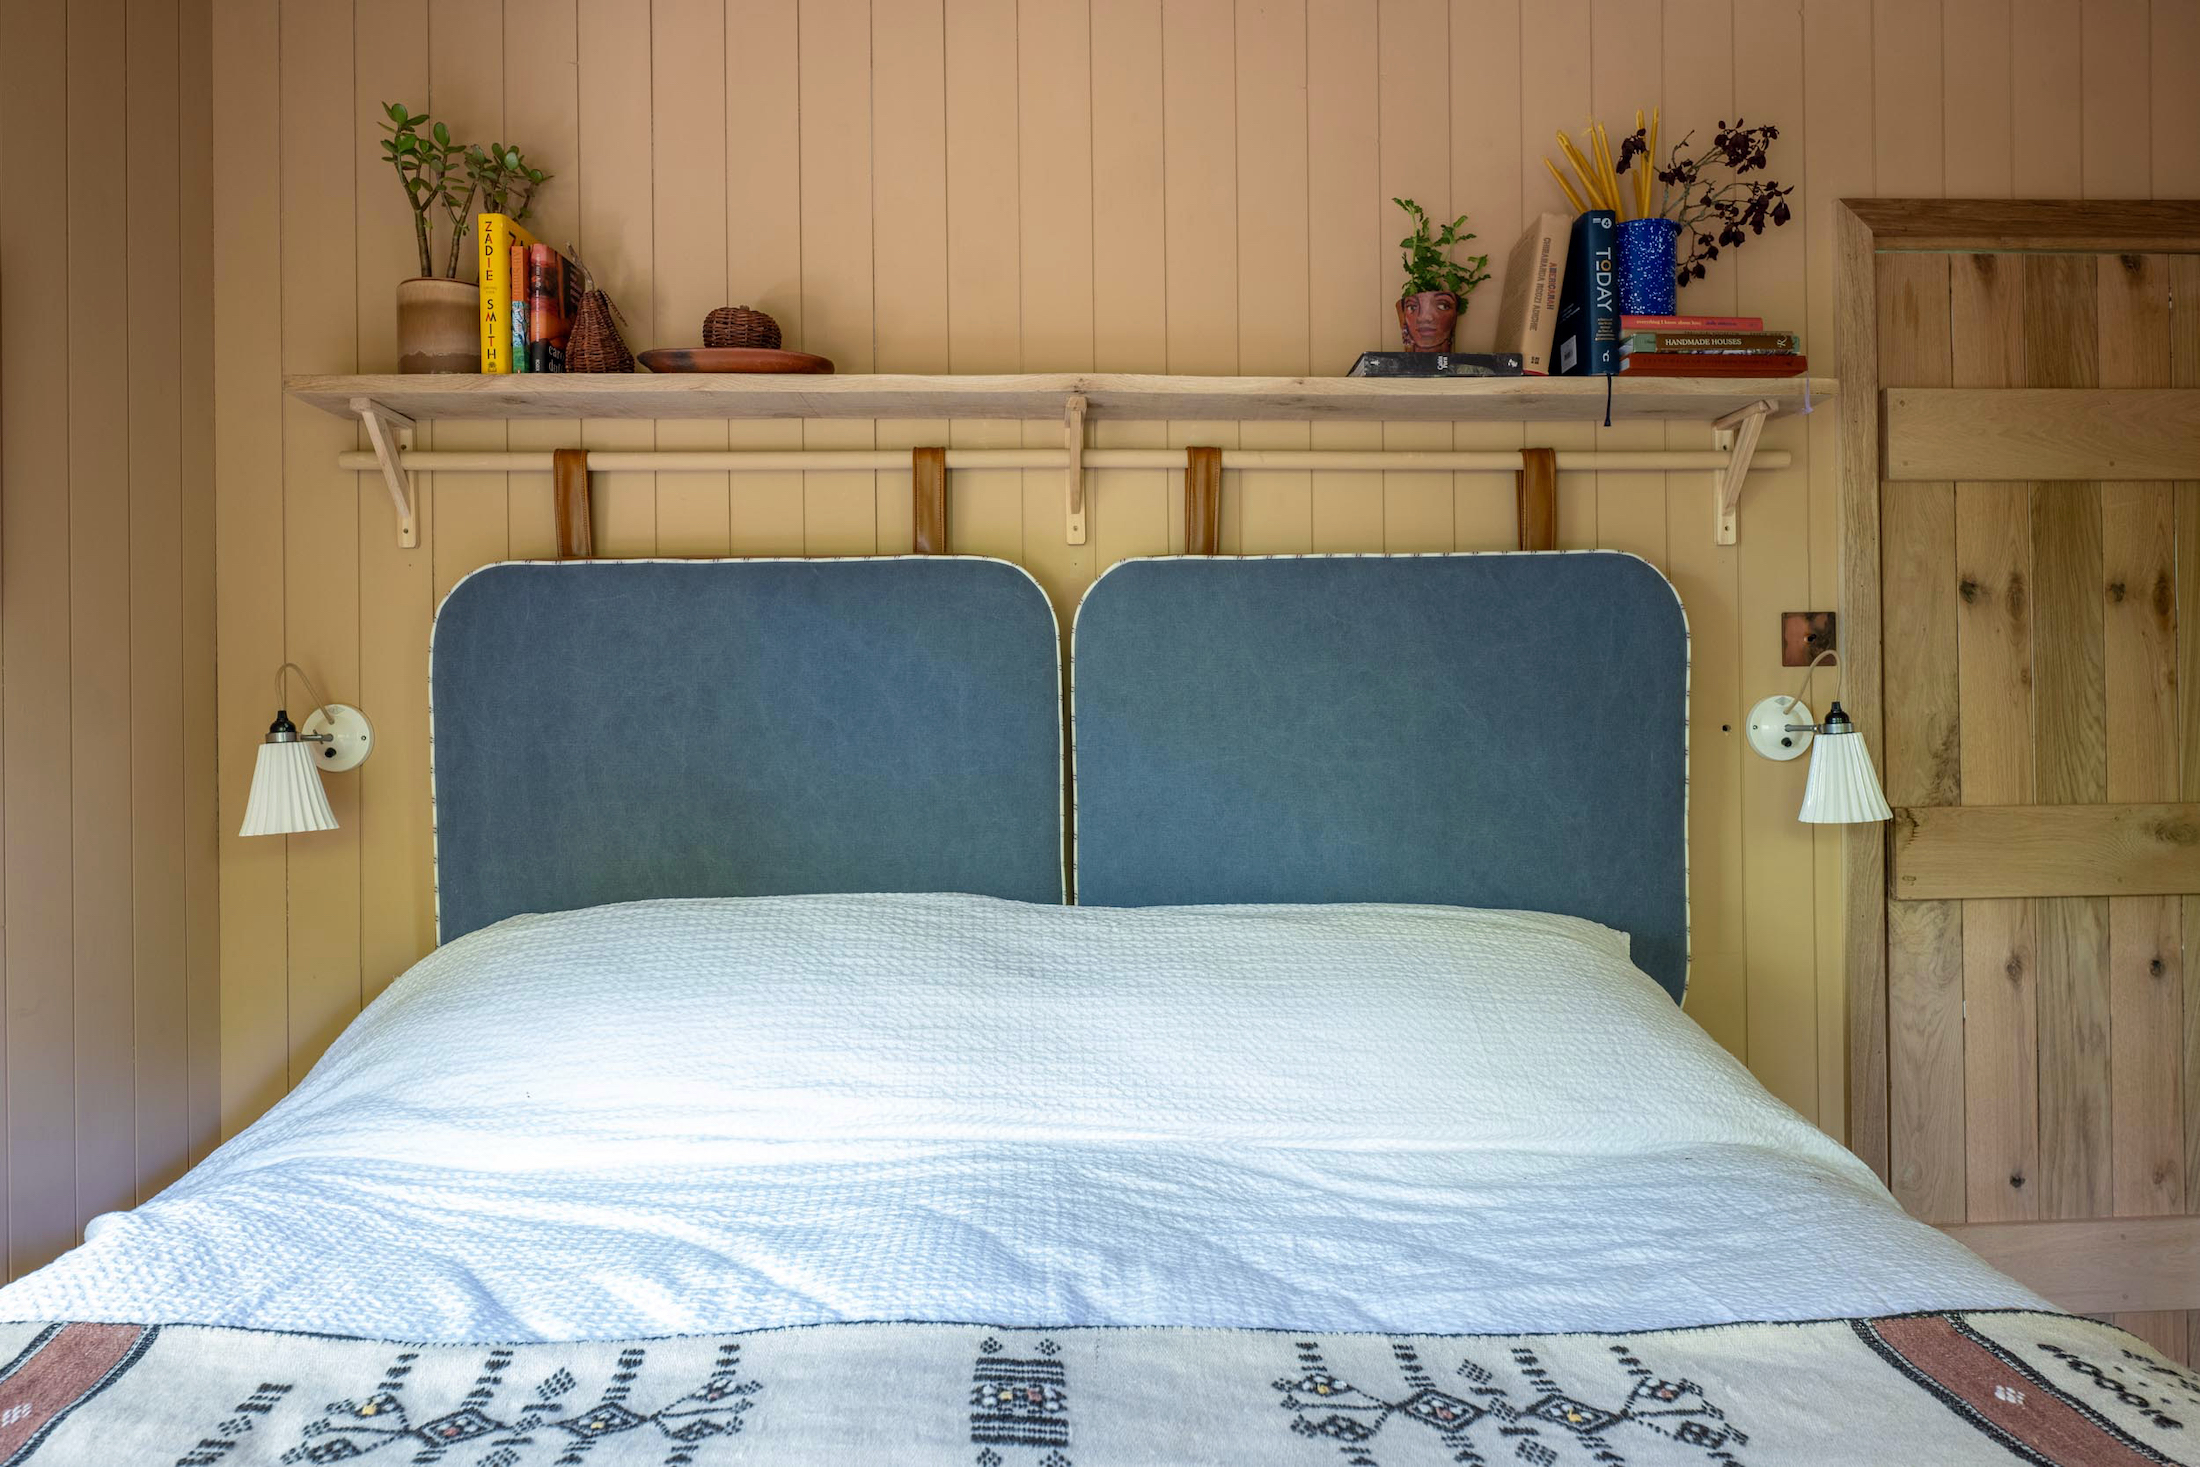 The Quist small bedroom king bed with sliding headboard. Luke Atkinson photo.